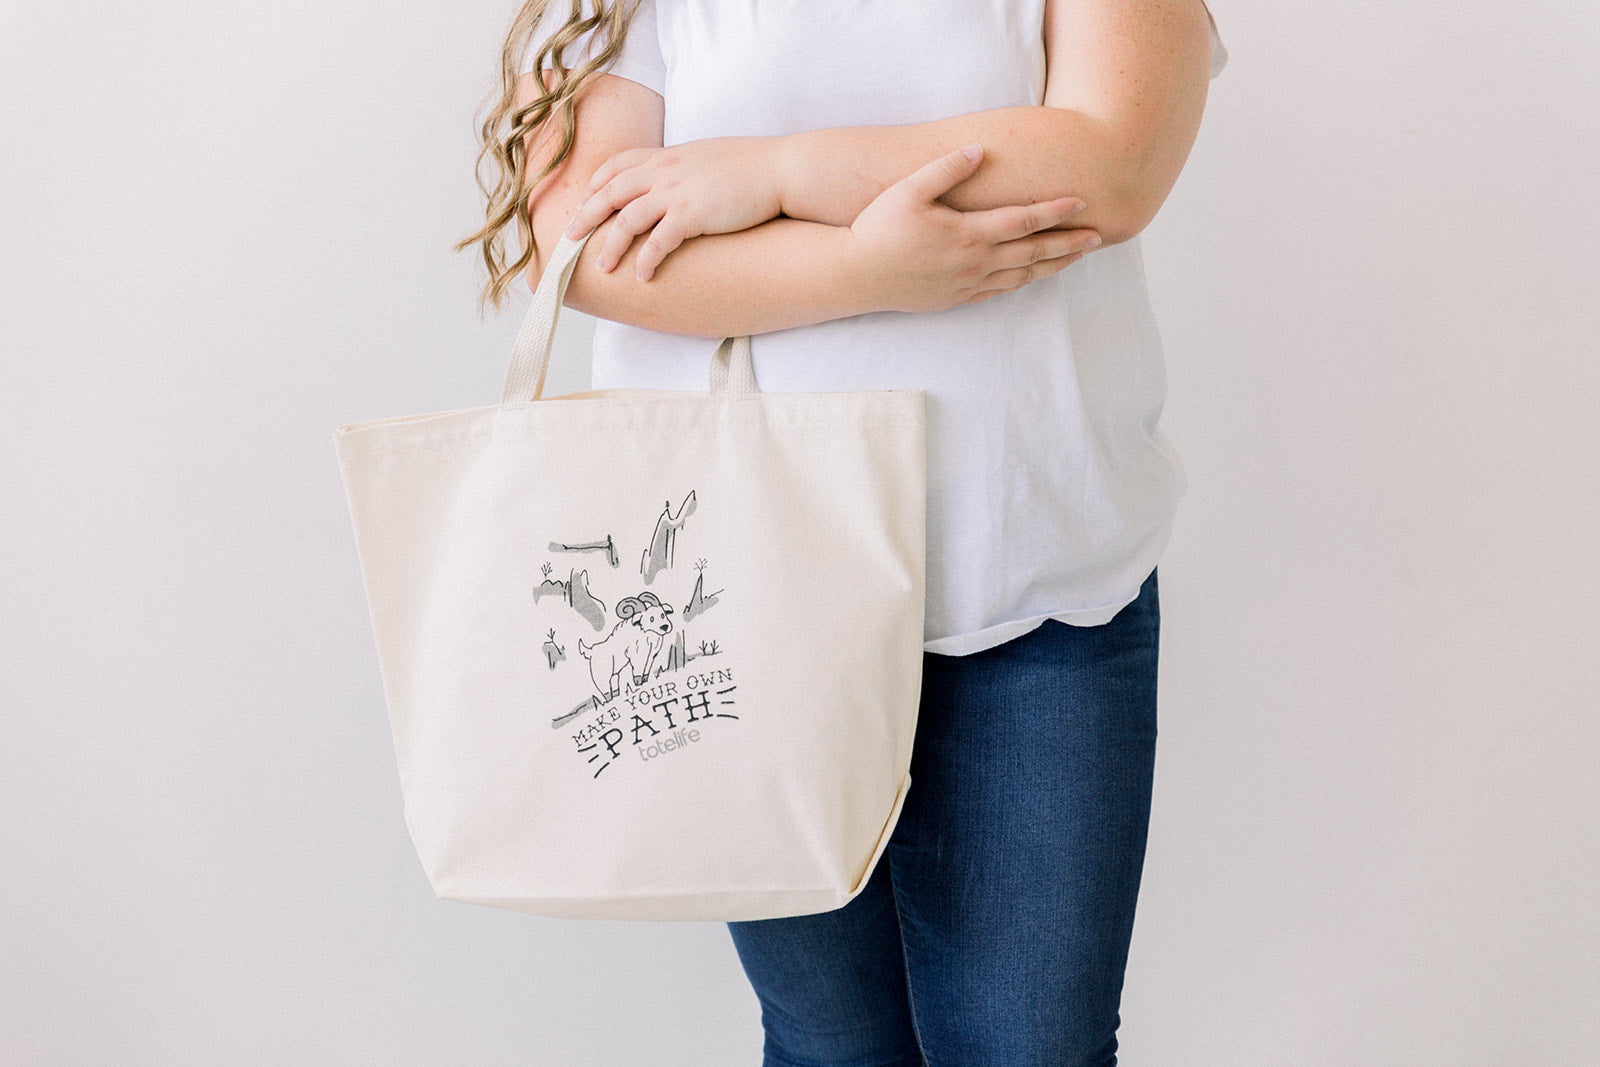 Make Your Own Path Tote